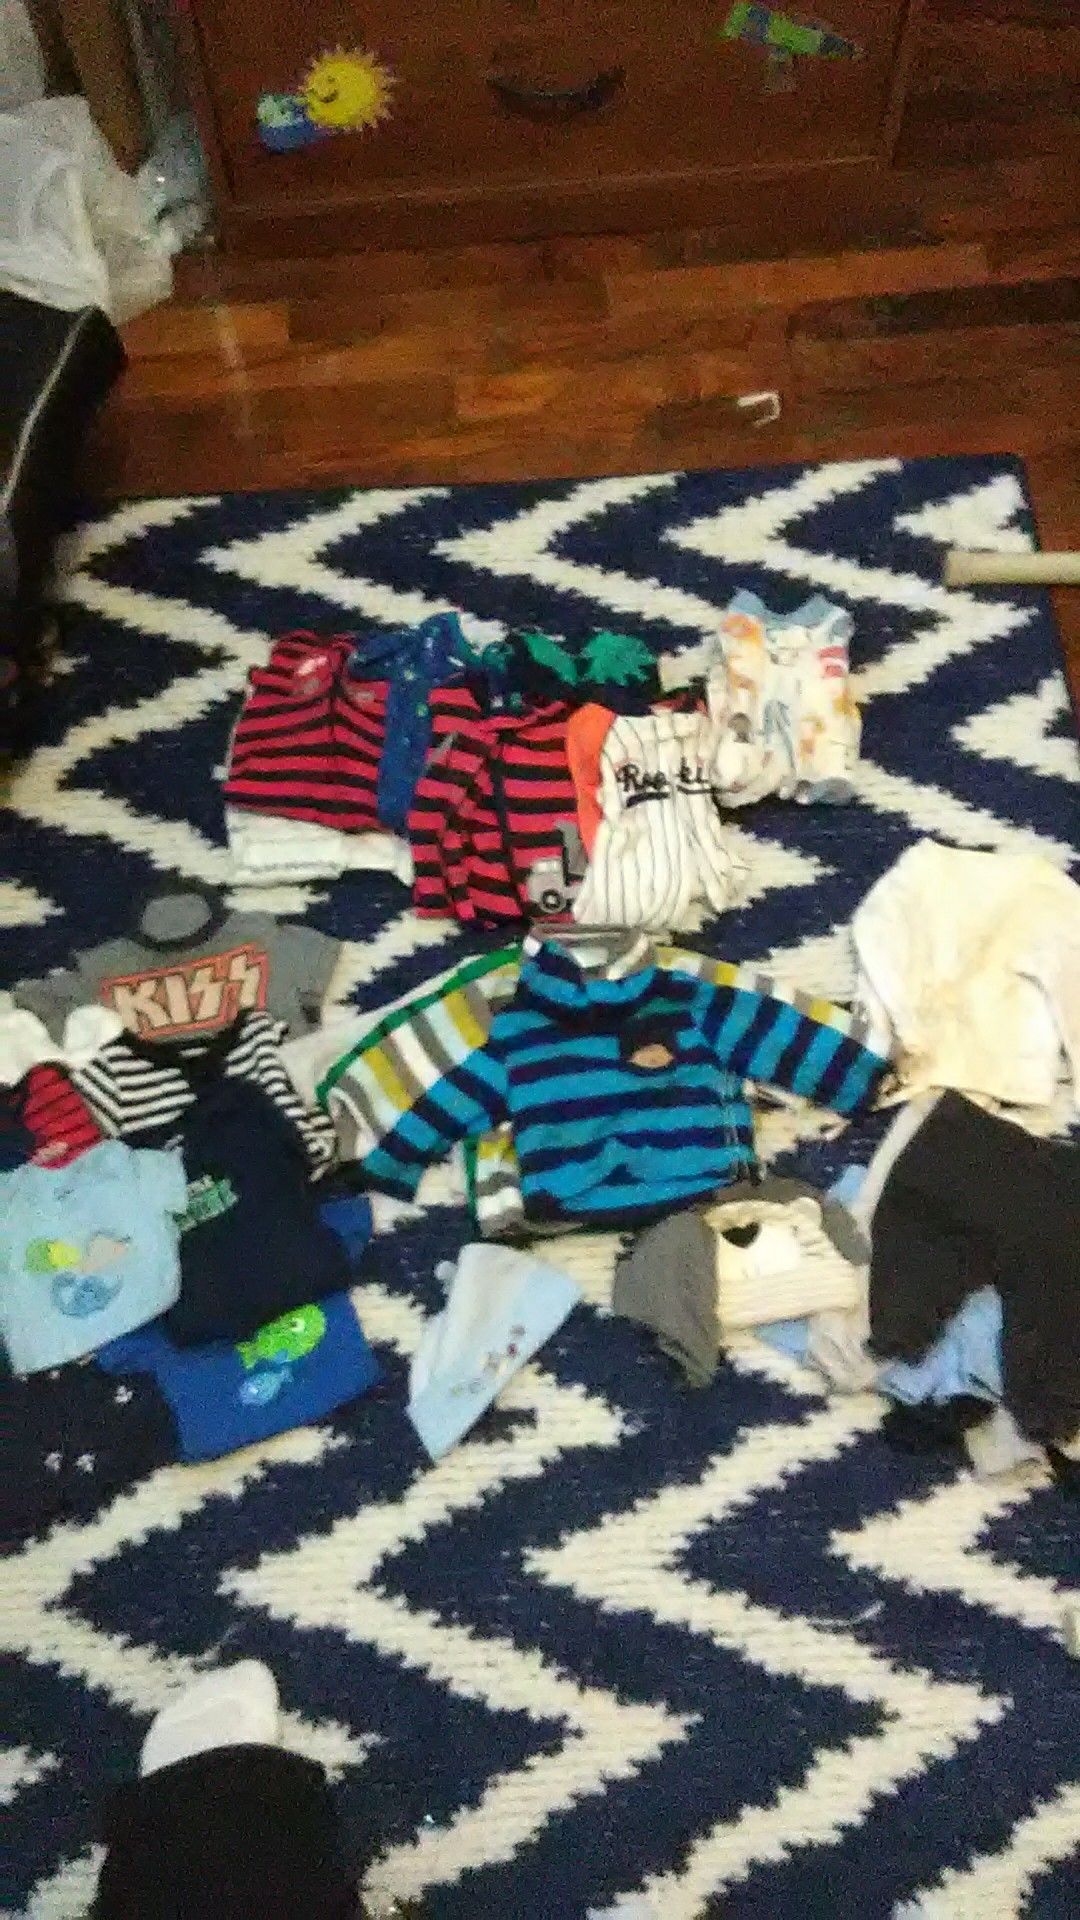 Free Baby clothes size new born, and 3-6 and 6-9 months and baby Jordans size 1c